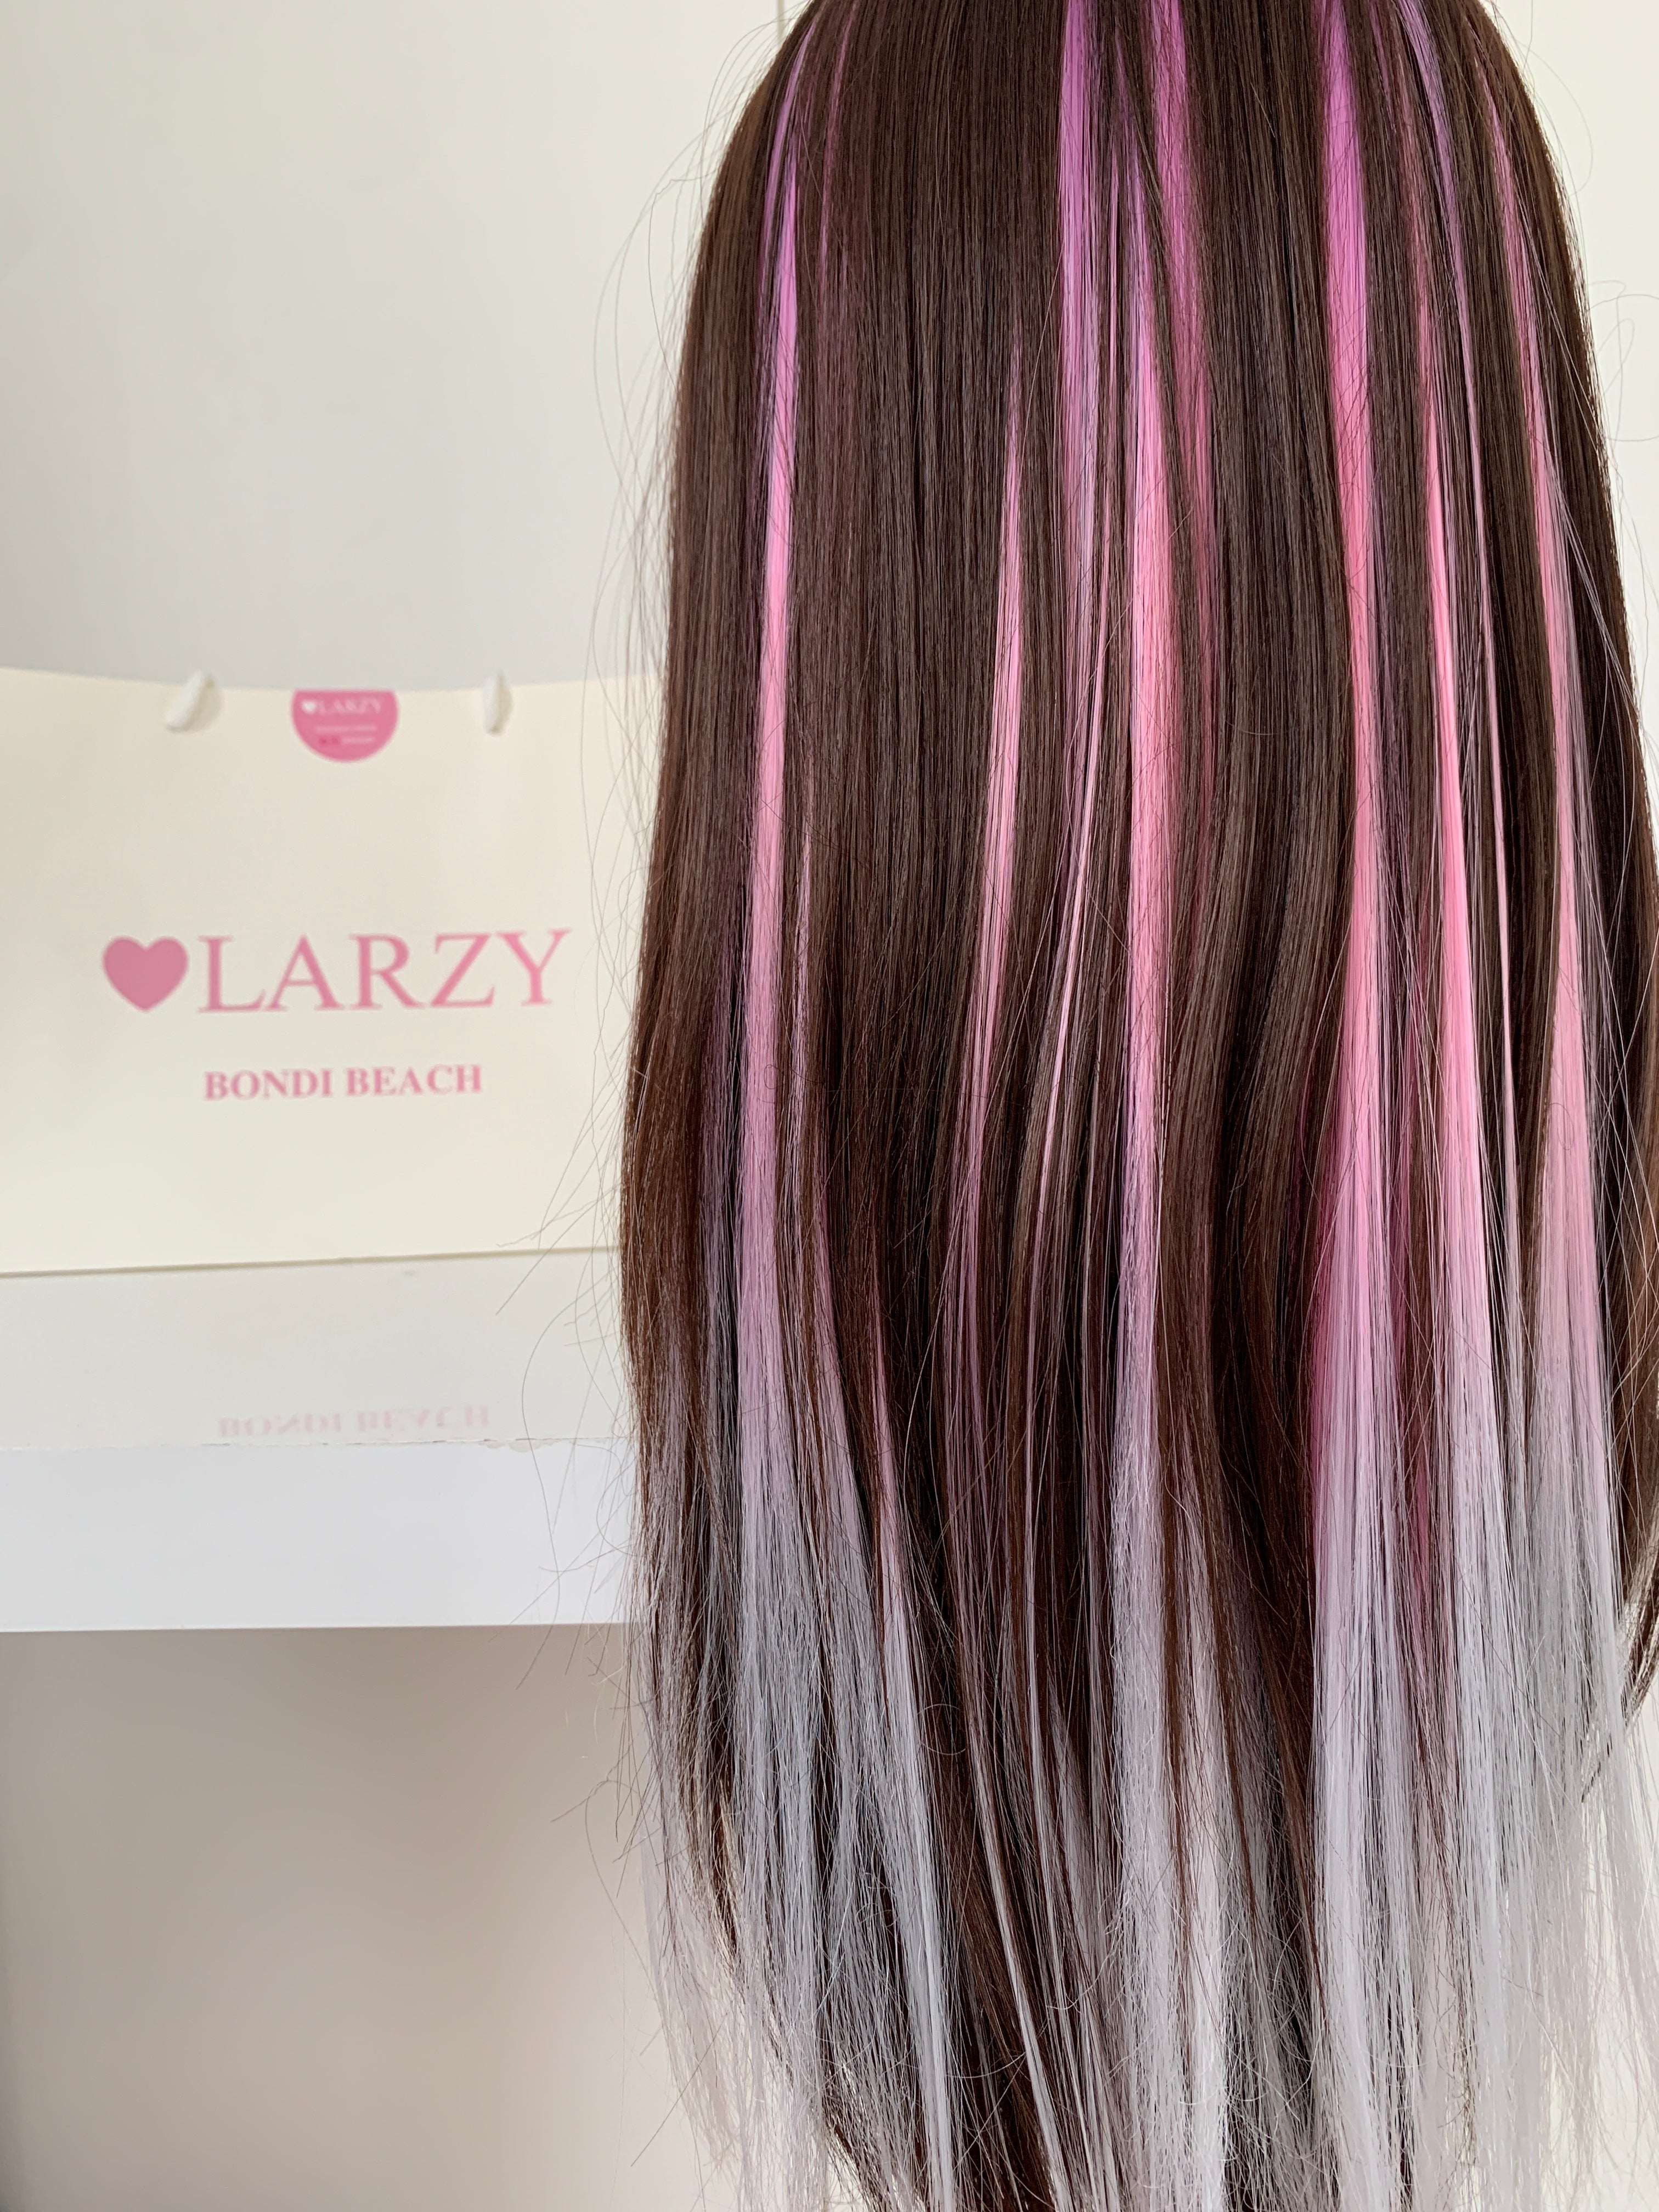 brown pink and purple ombre hair